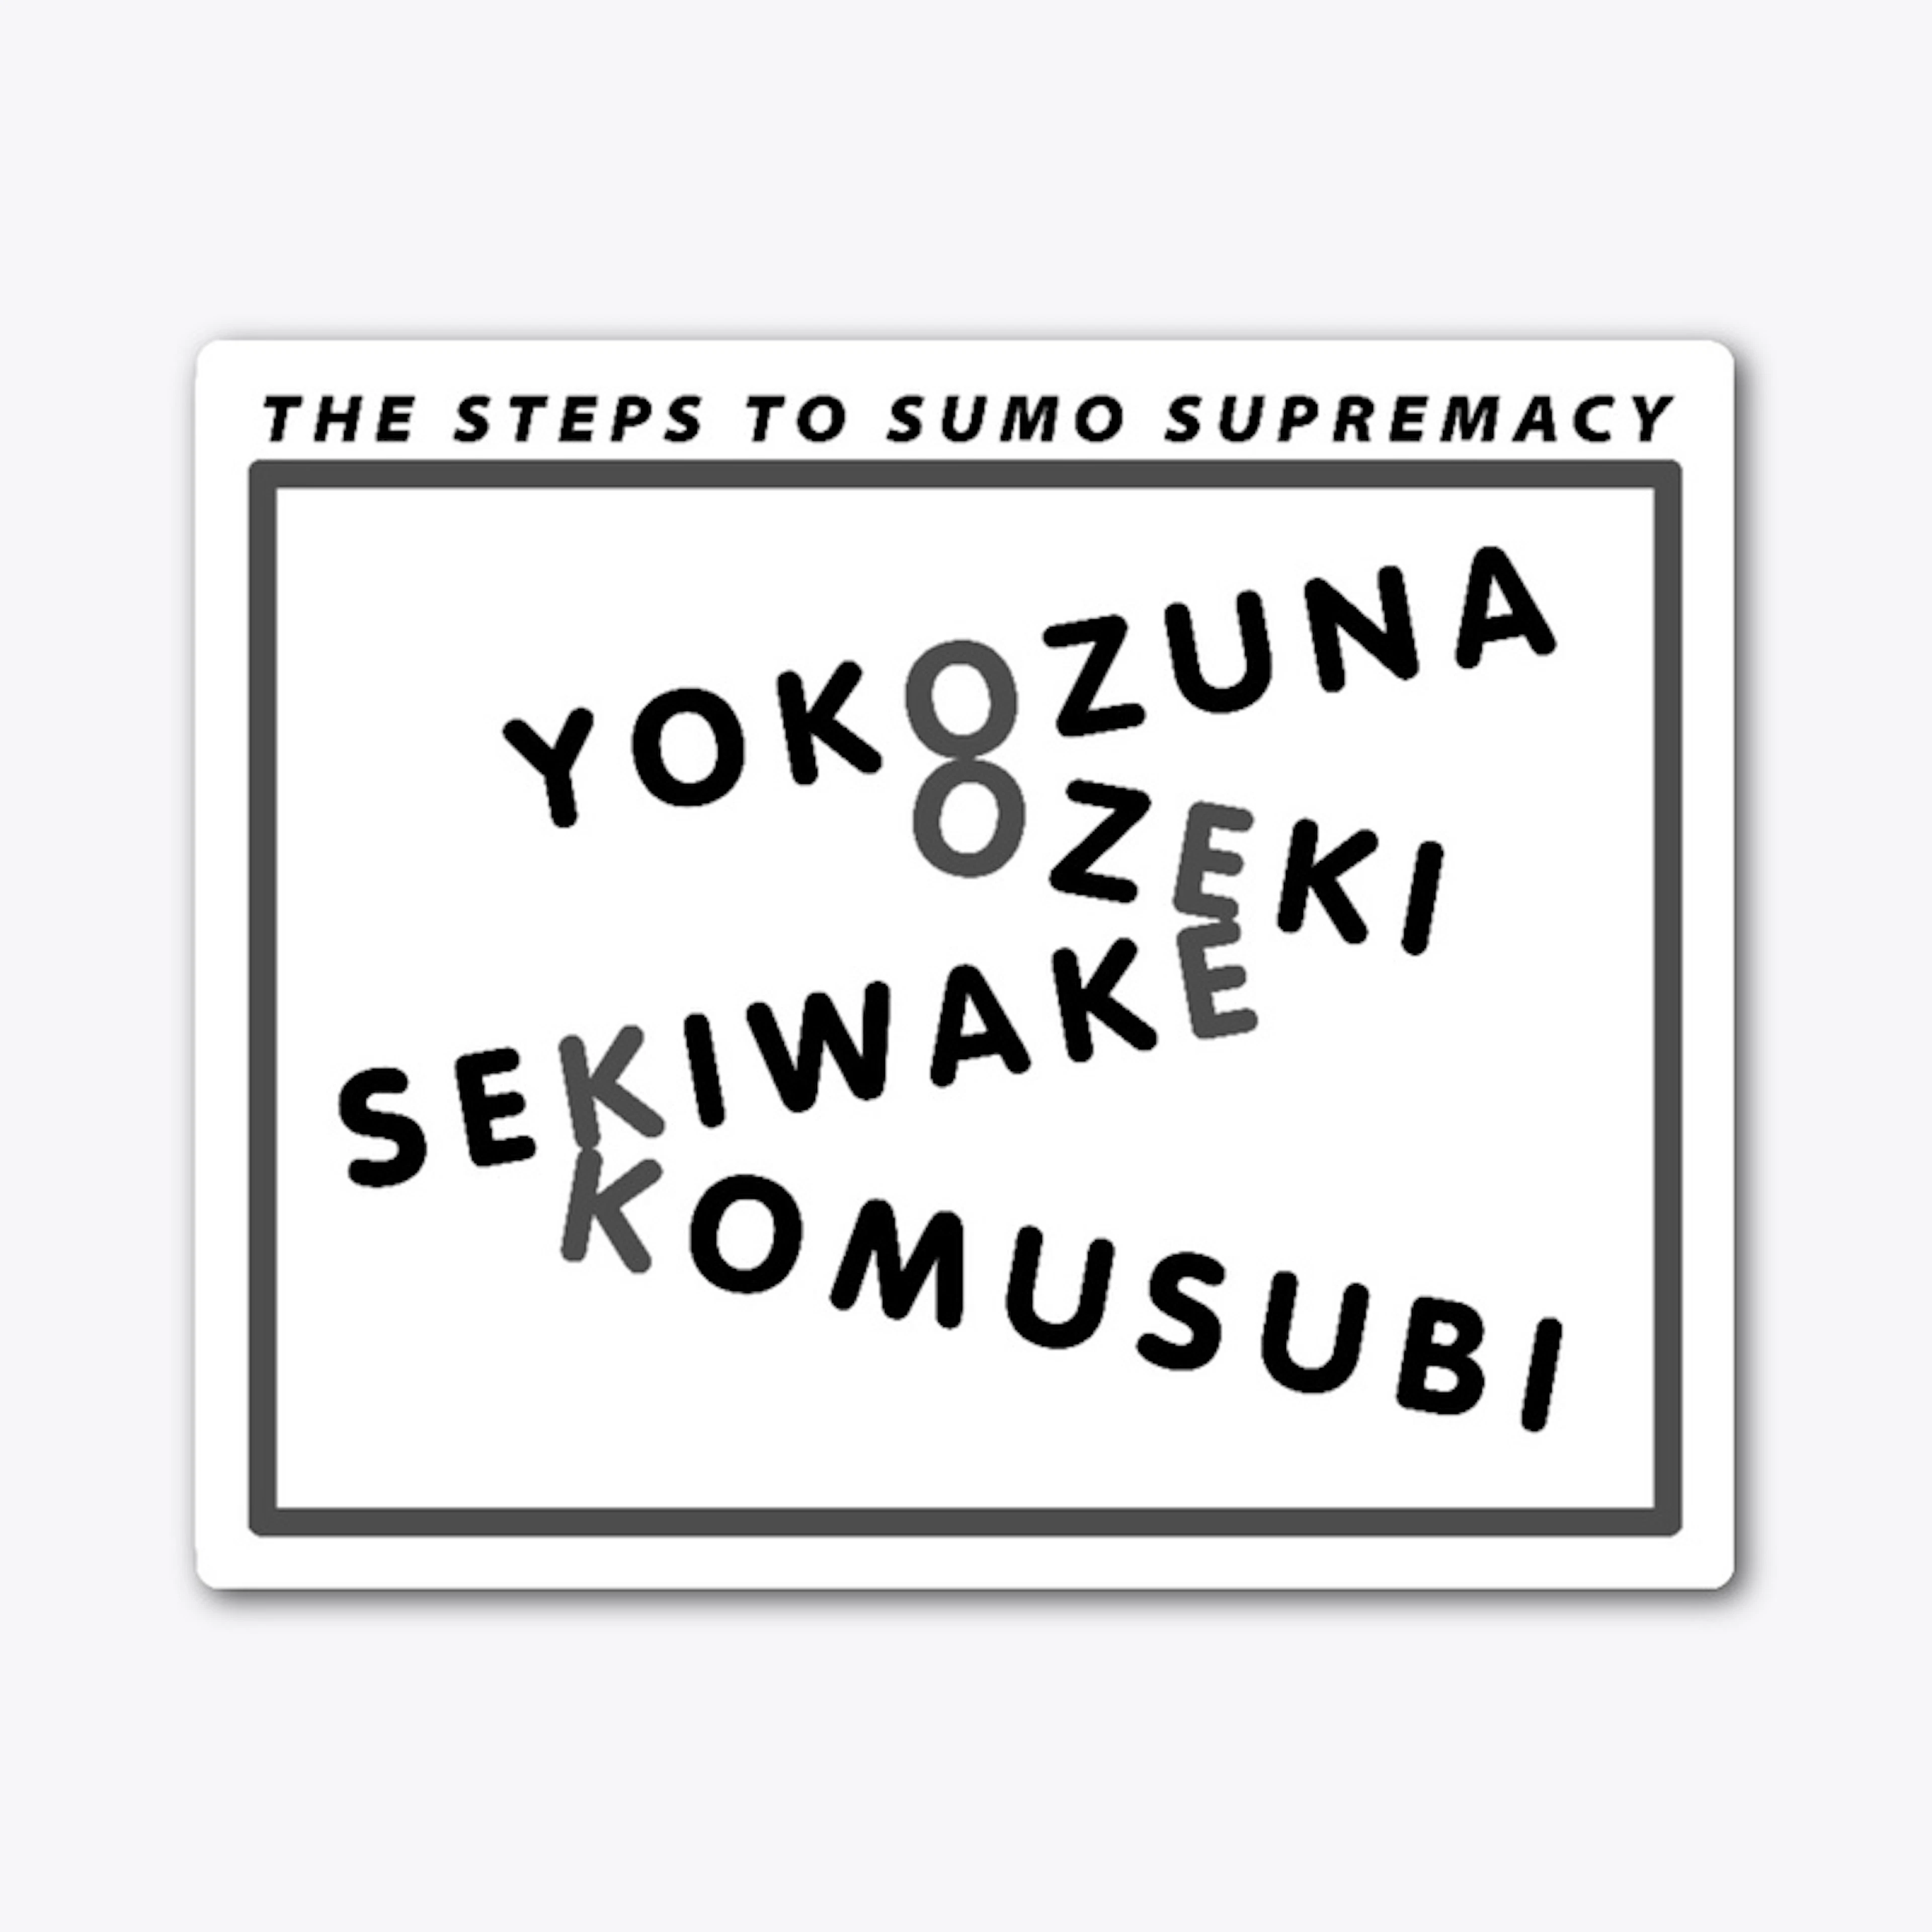 The Steps to SUMO Supremacy